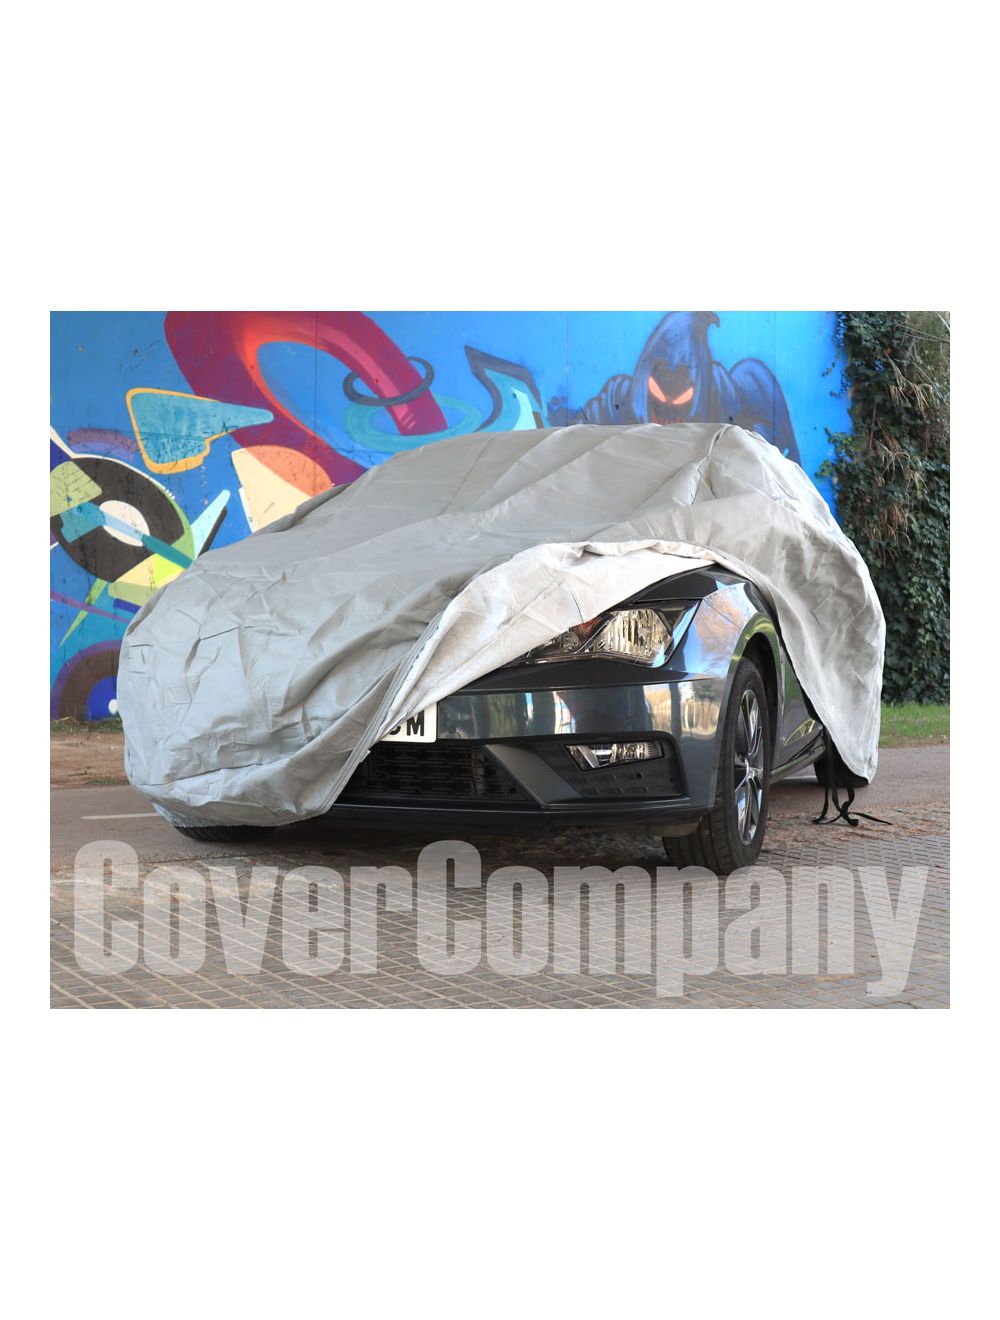 High Quality Breathable Water Resistant Full Car Cover To Fit